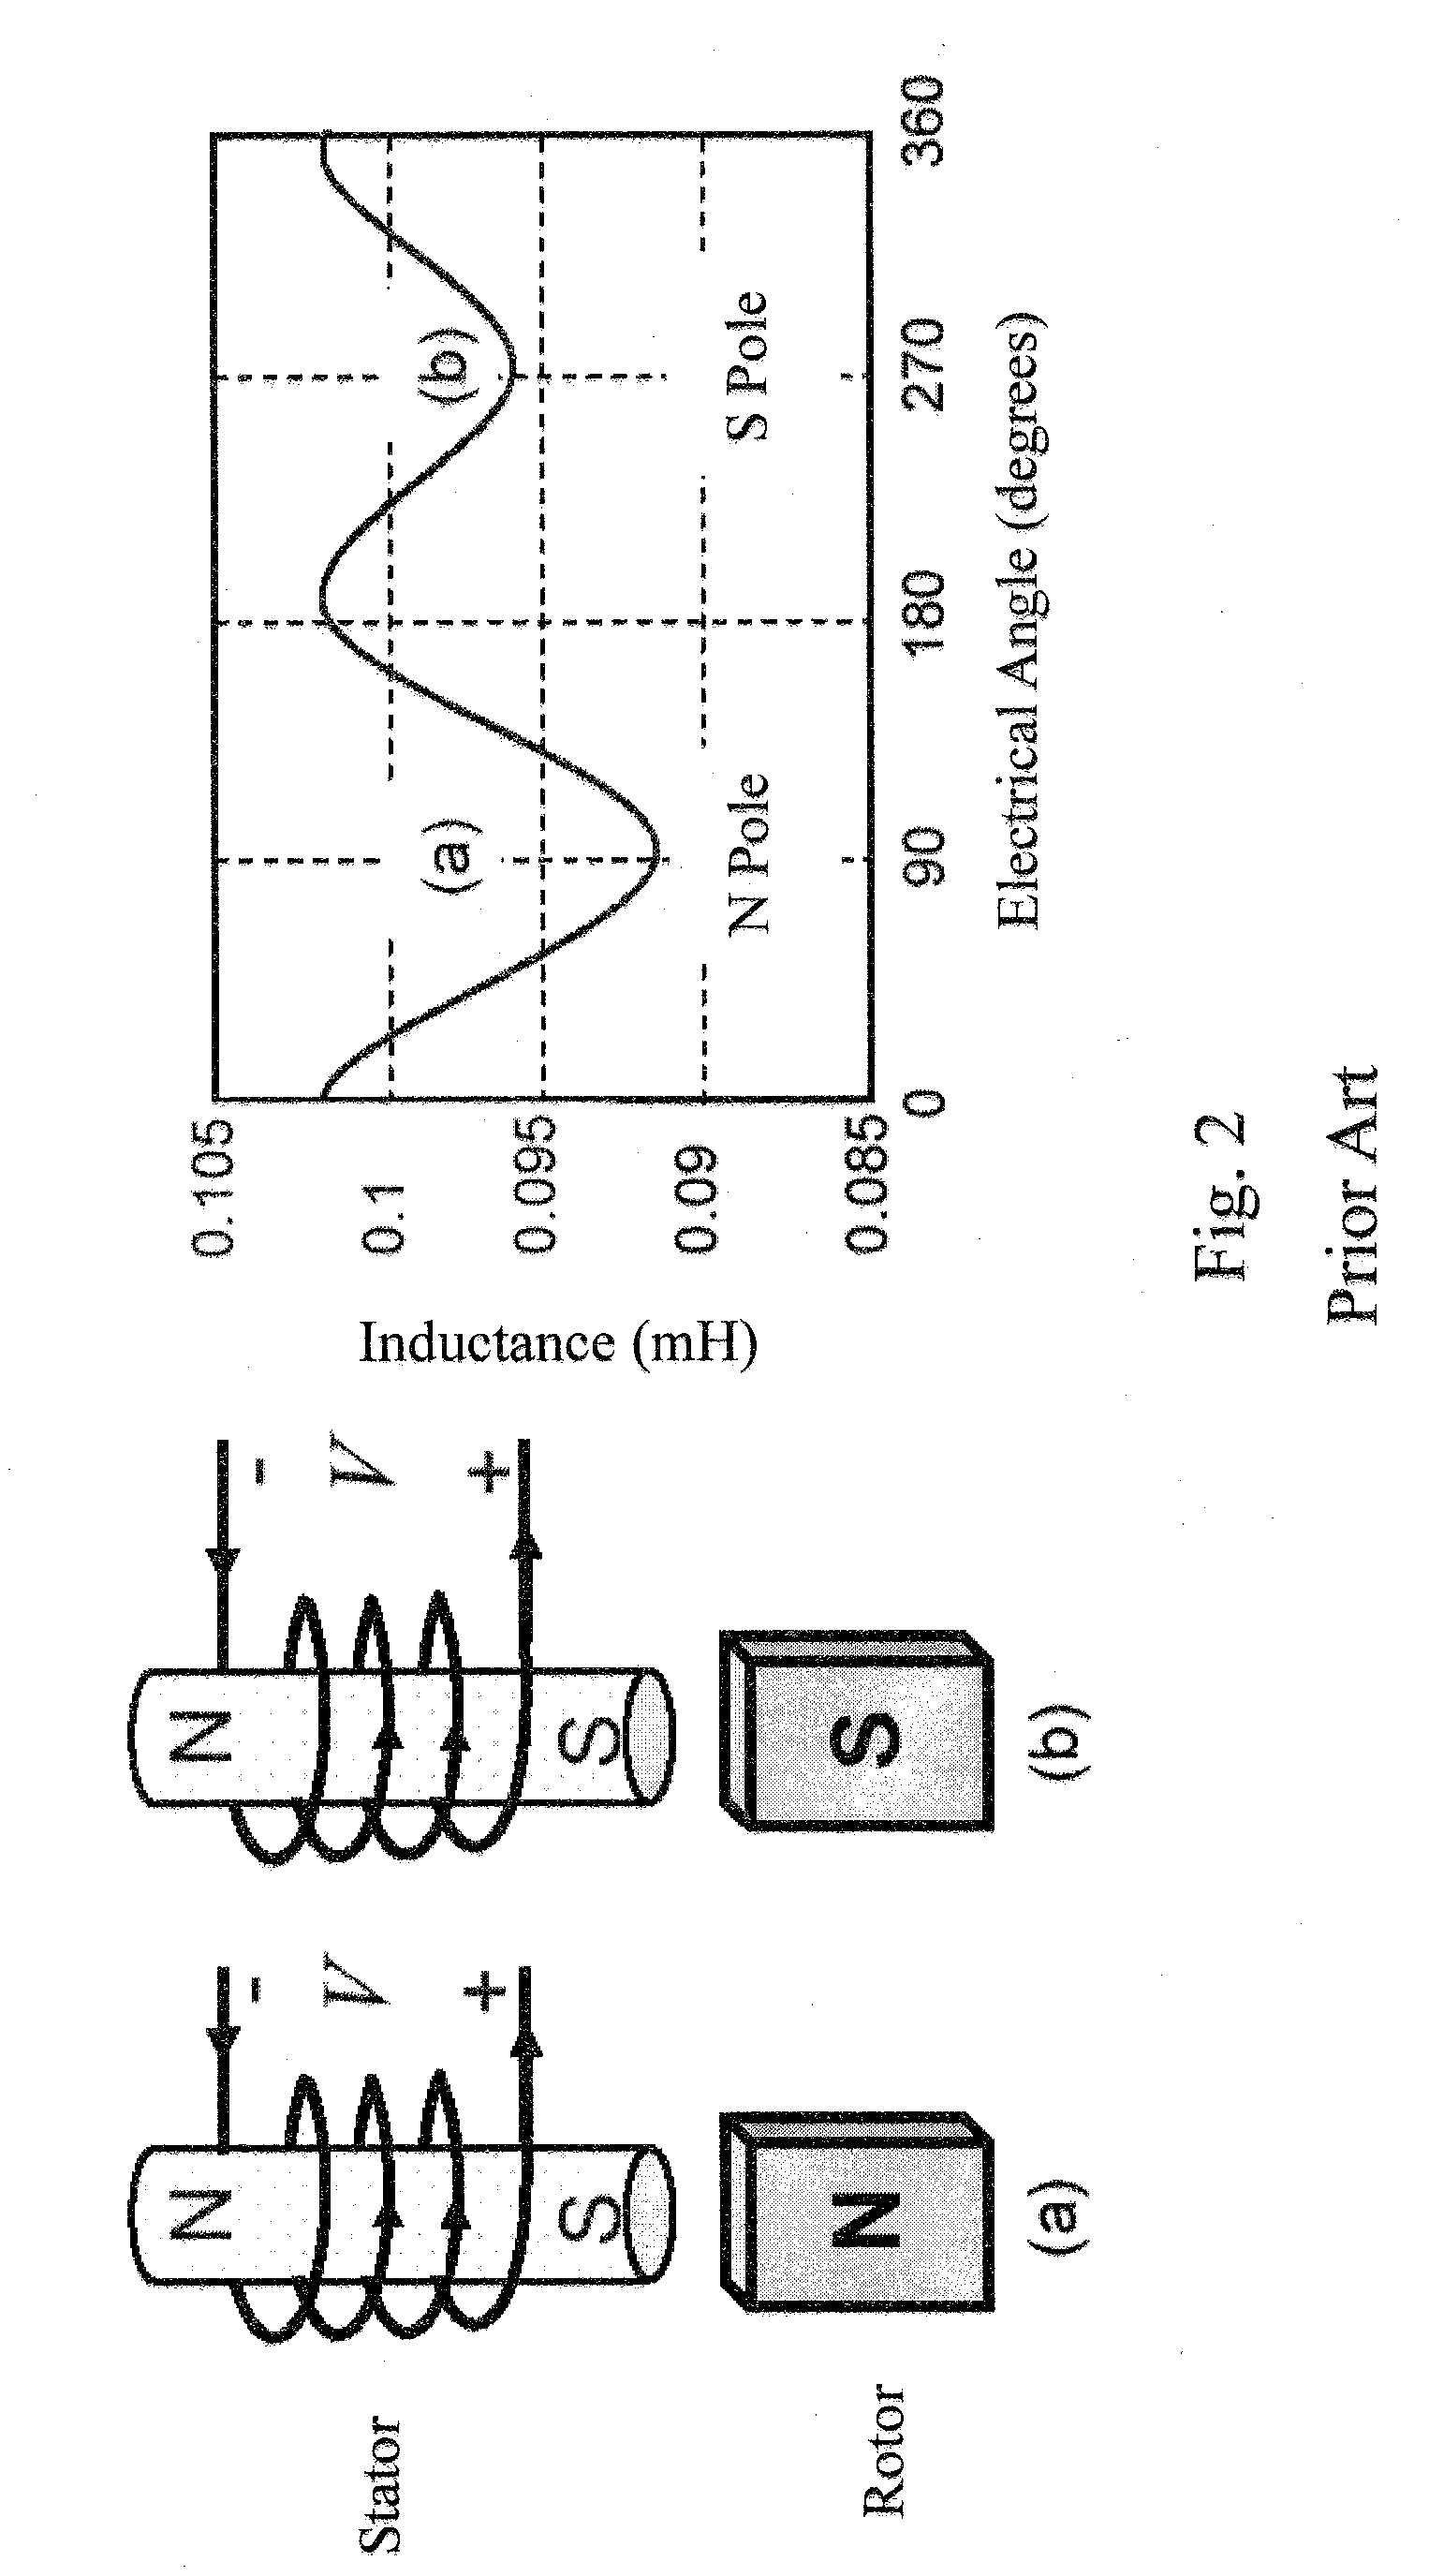 Initial rotor position detection for permanent magnet synchronous motors